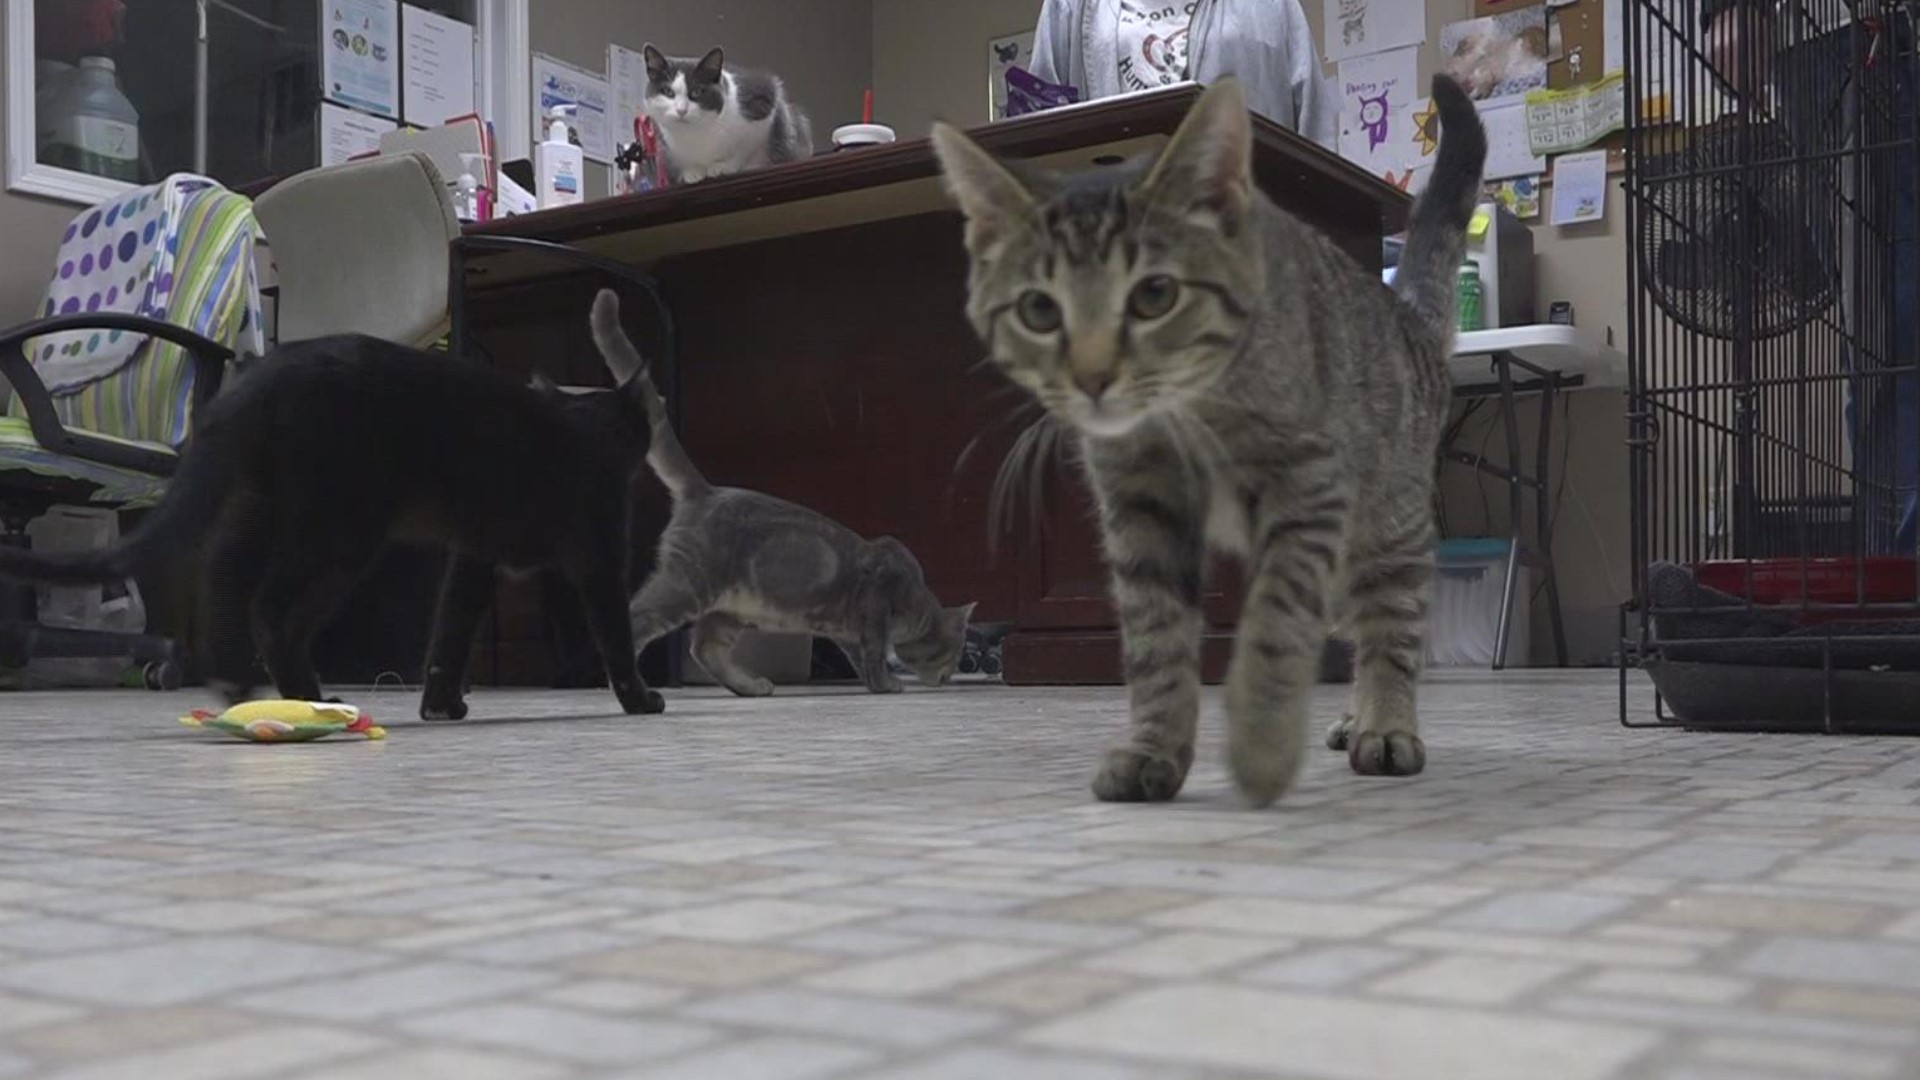 It's a busy time of year for the humane society, now faced with a new challenge. "We're not just moving a household. We're moving 50 cats and six dogs."